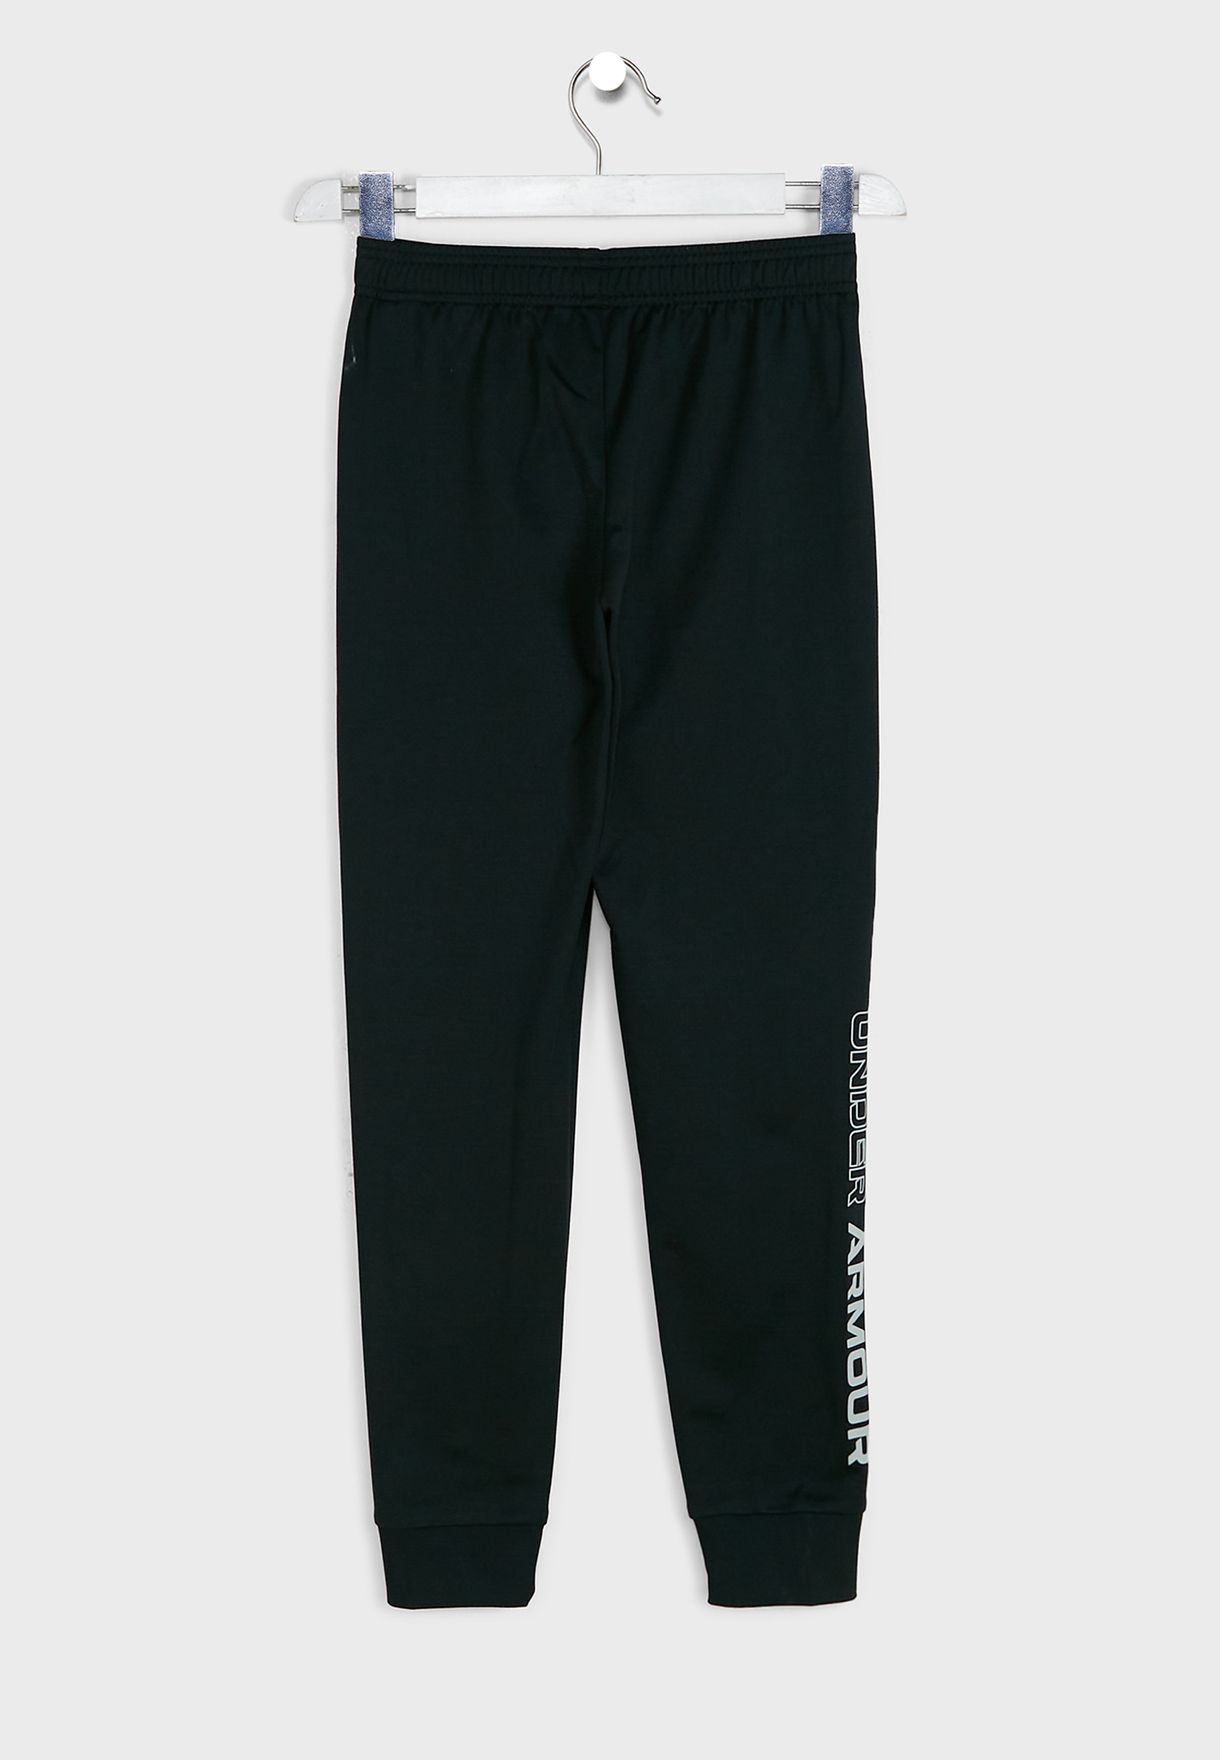 2.0 Youth Brawler Tapered Sweatpants